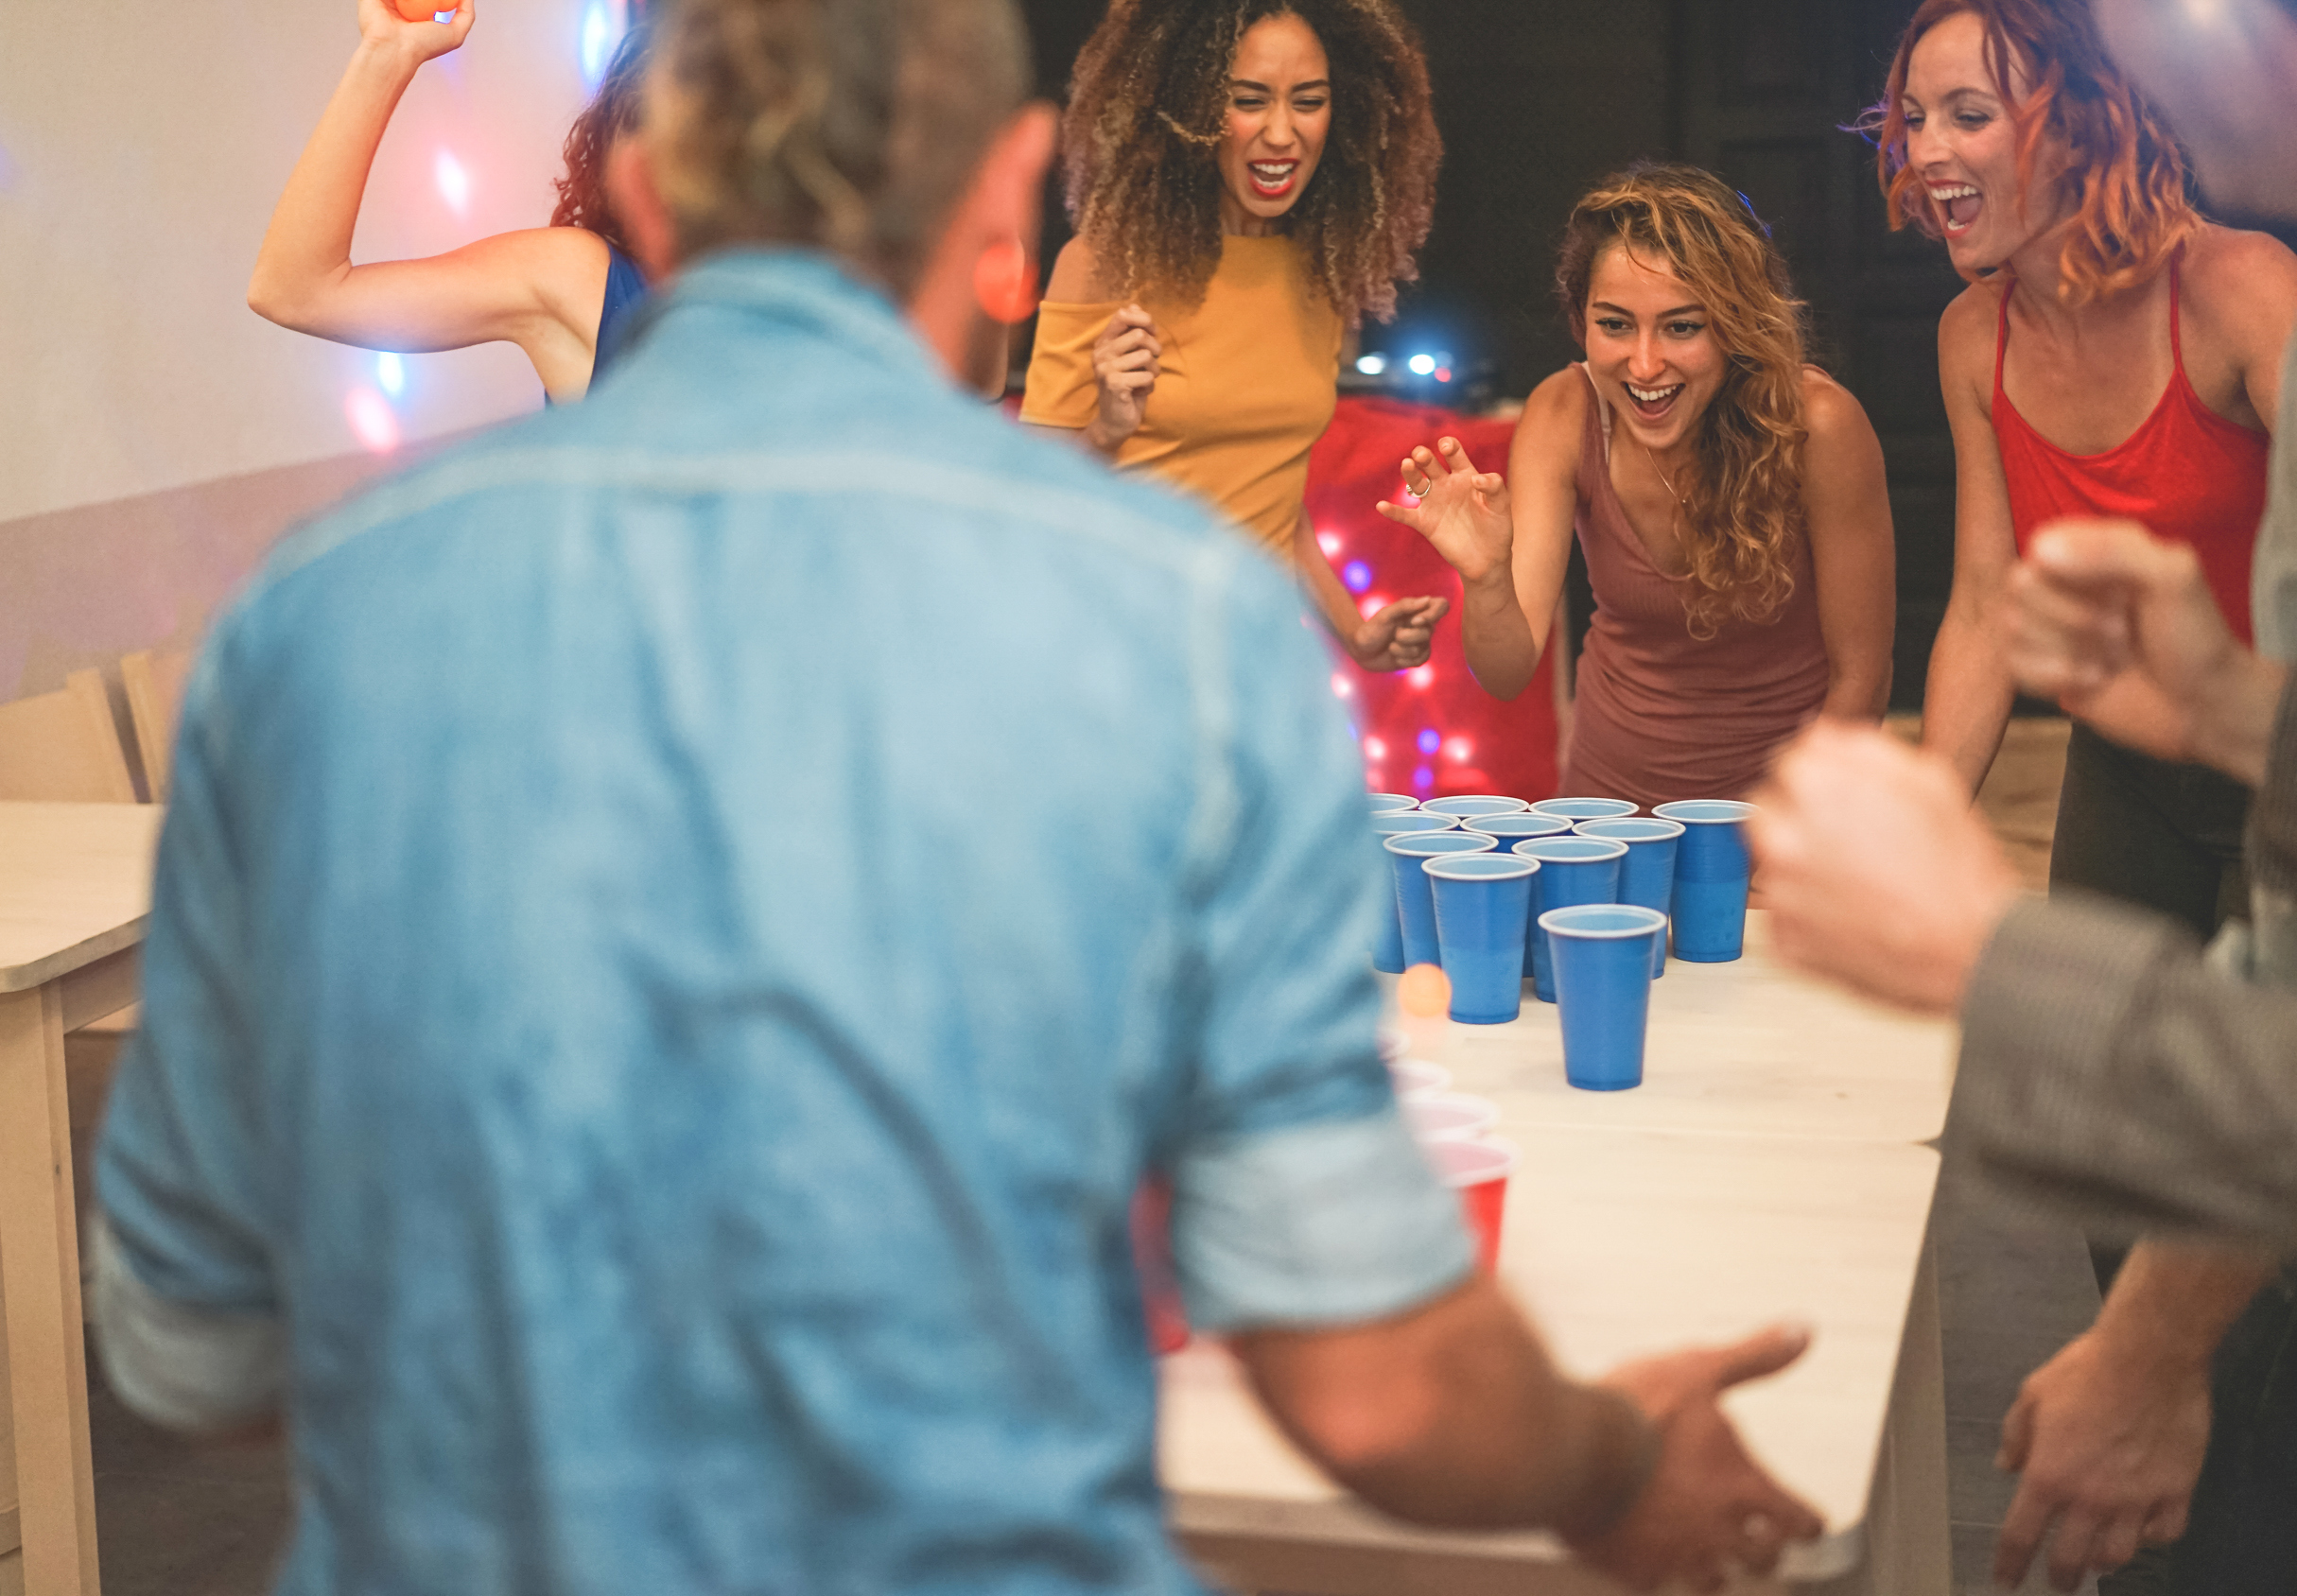 Group of happy friends playing beer pong in pub cocktail bar - Young millennials people having fun doing party at night - Friendship, fest and nighlife concept - Focus on center girl face